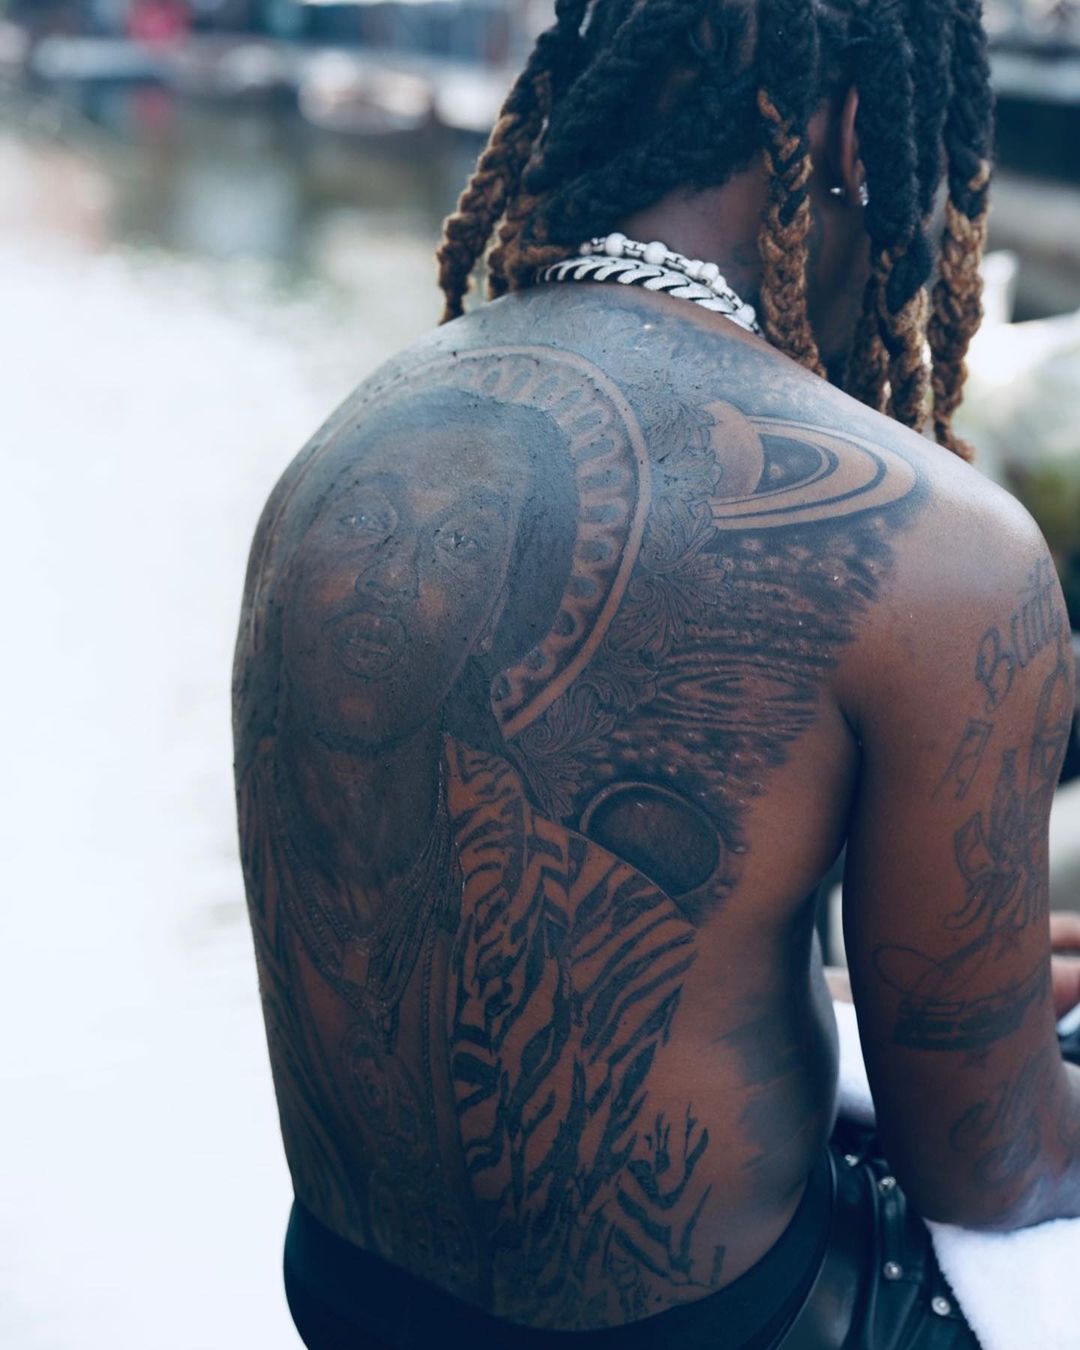 Offsets gets giant tattoo of his Late cousin, Takeoff on his back (Photos)